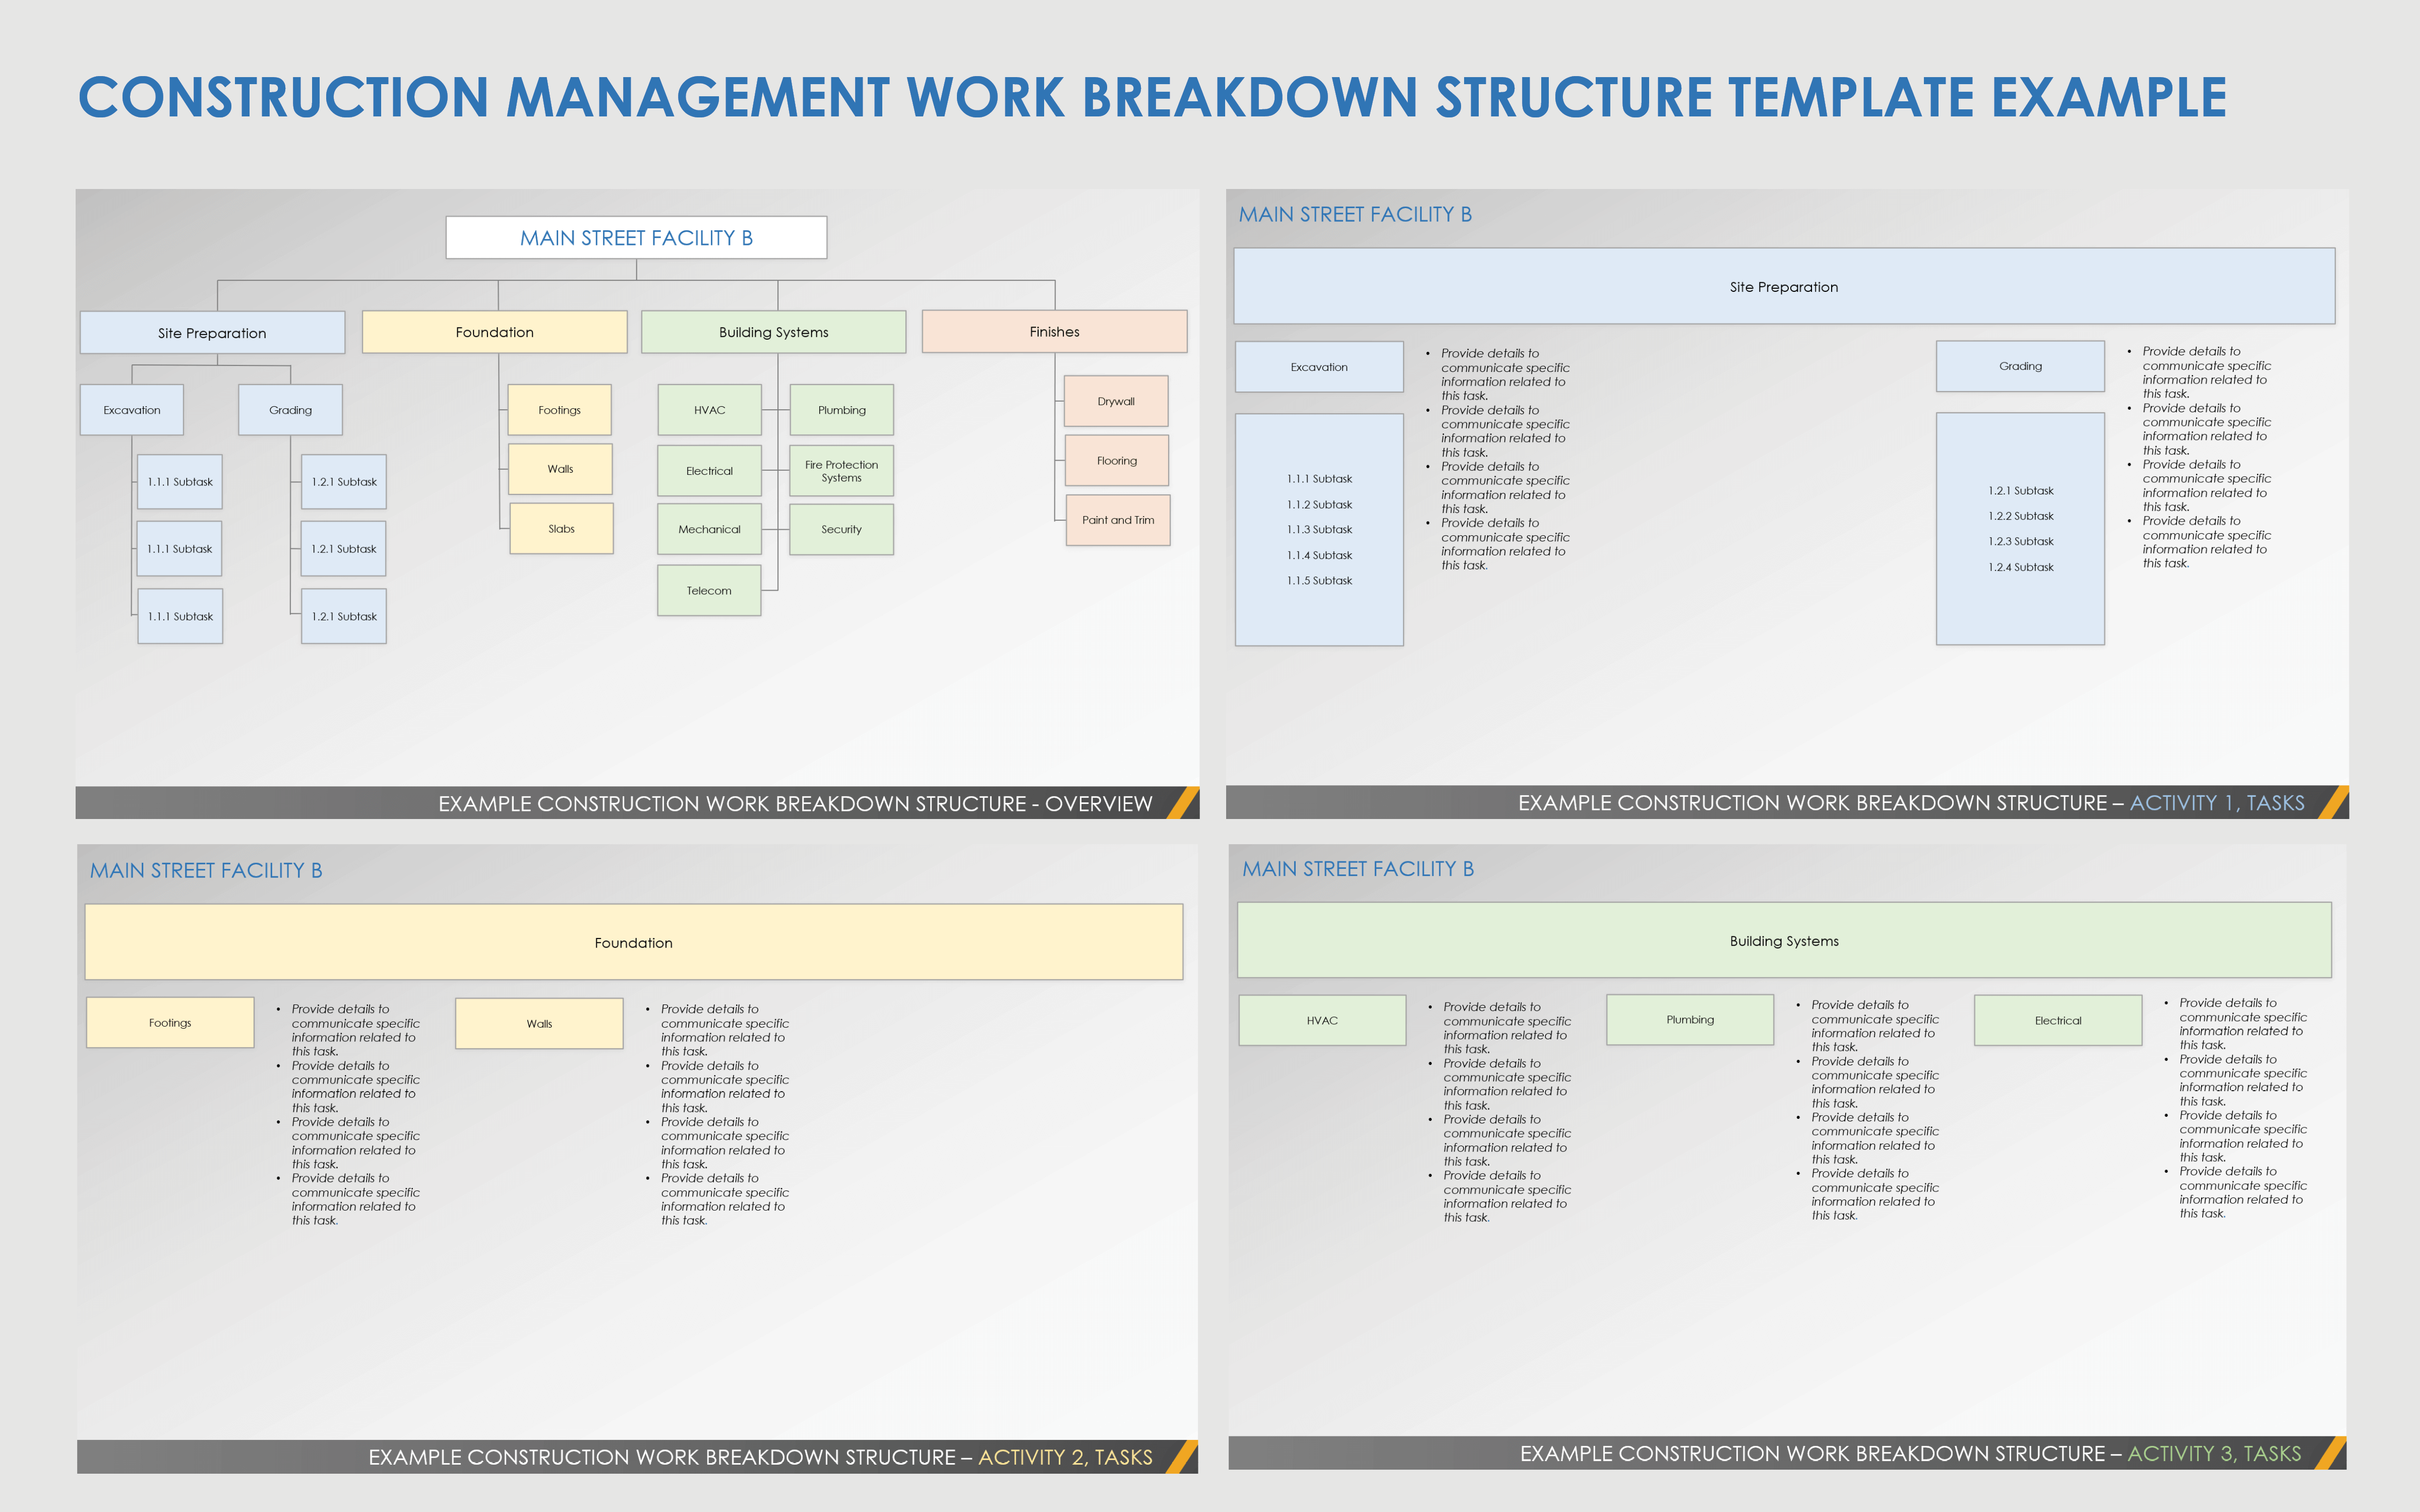 Construction Management Work Breakdown Structure Template Example PowerPoint